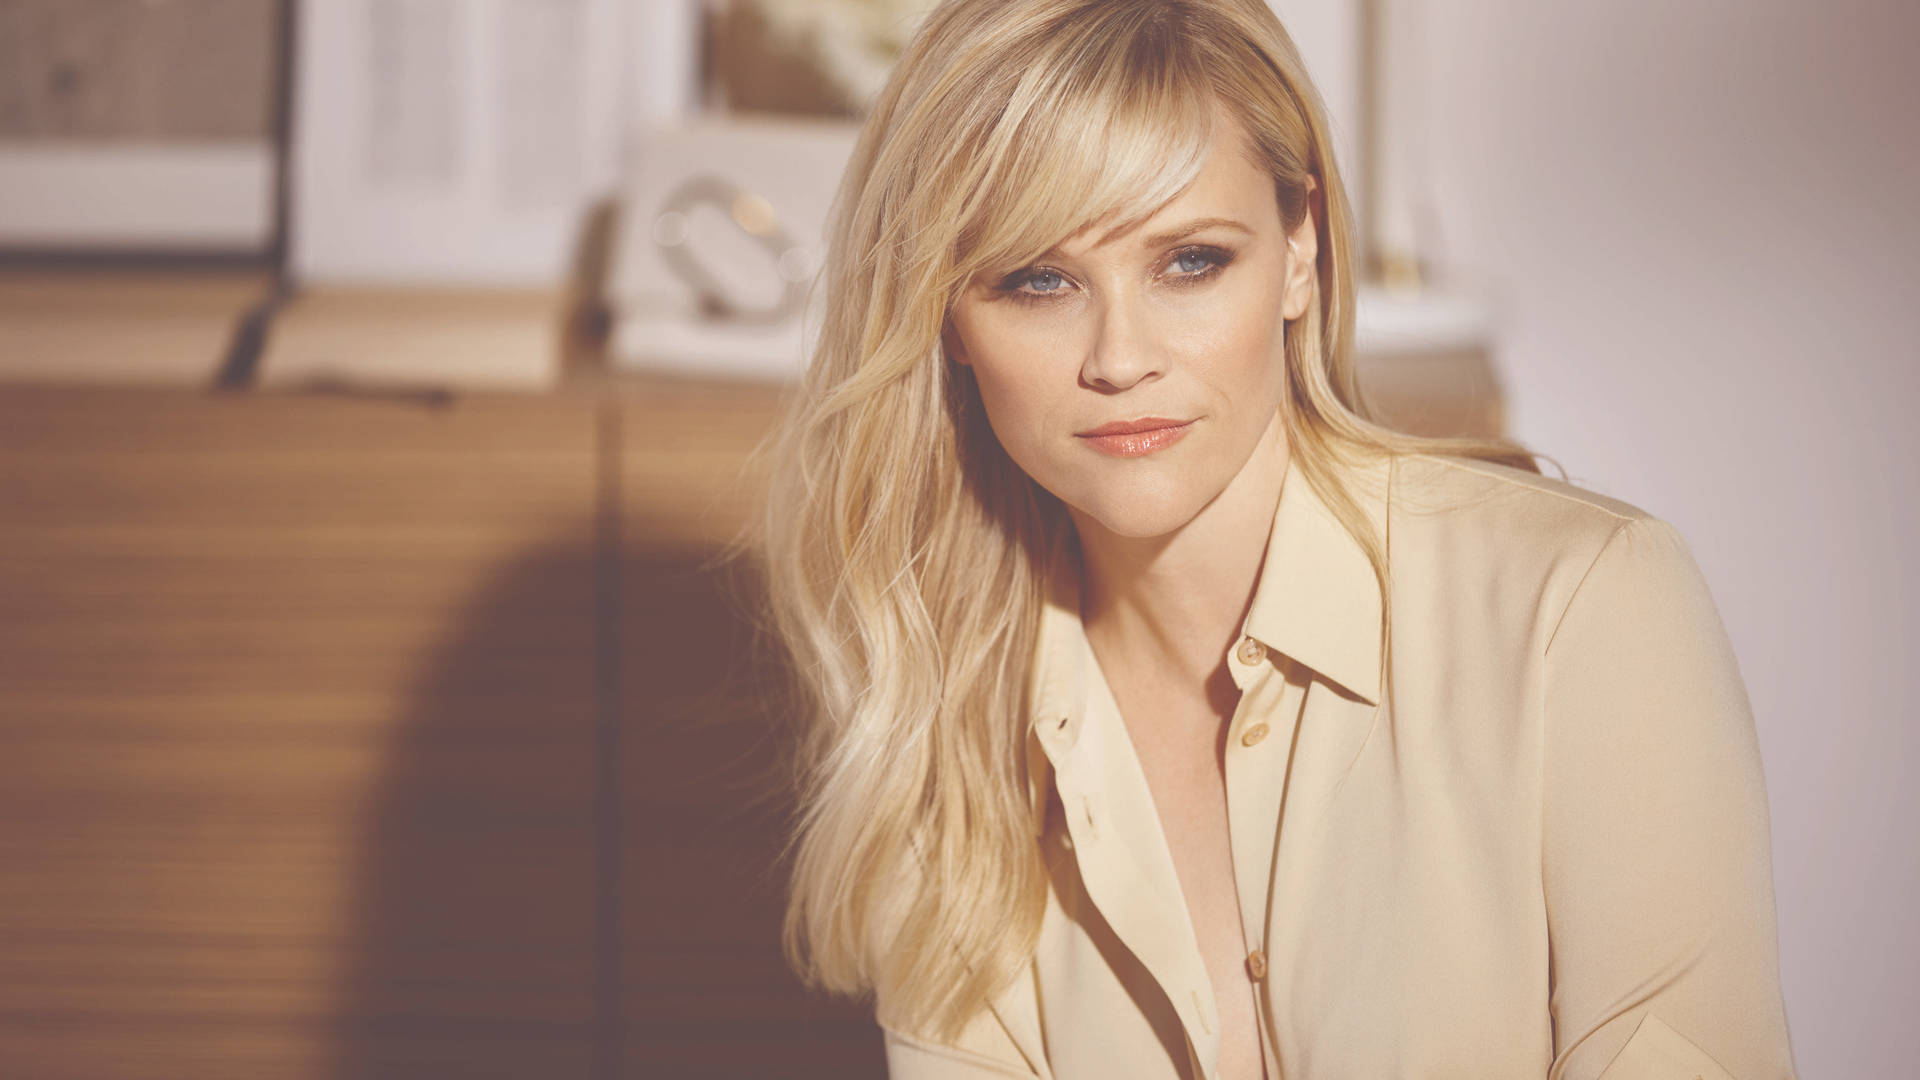 Top 999+ Reese Witherspoon Wallpaper Full HD, 4K✅Free to Use